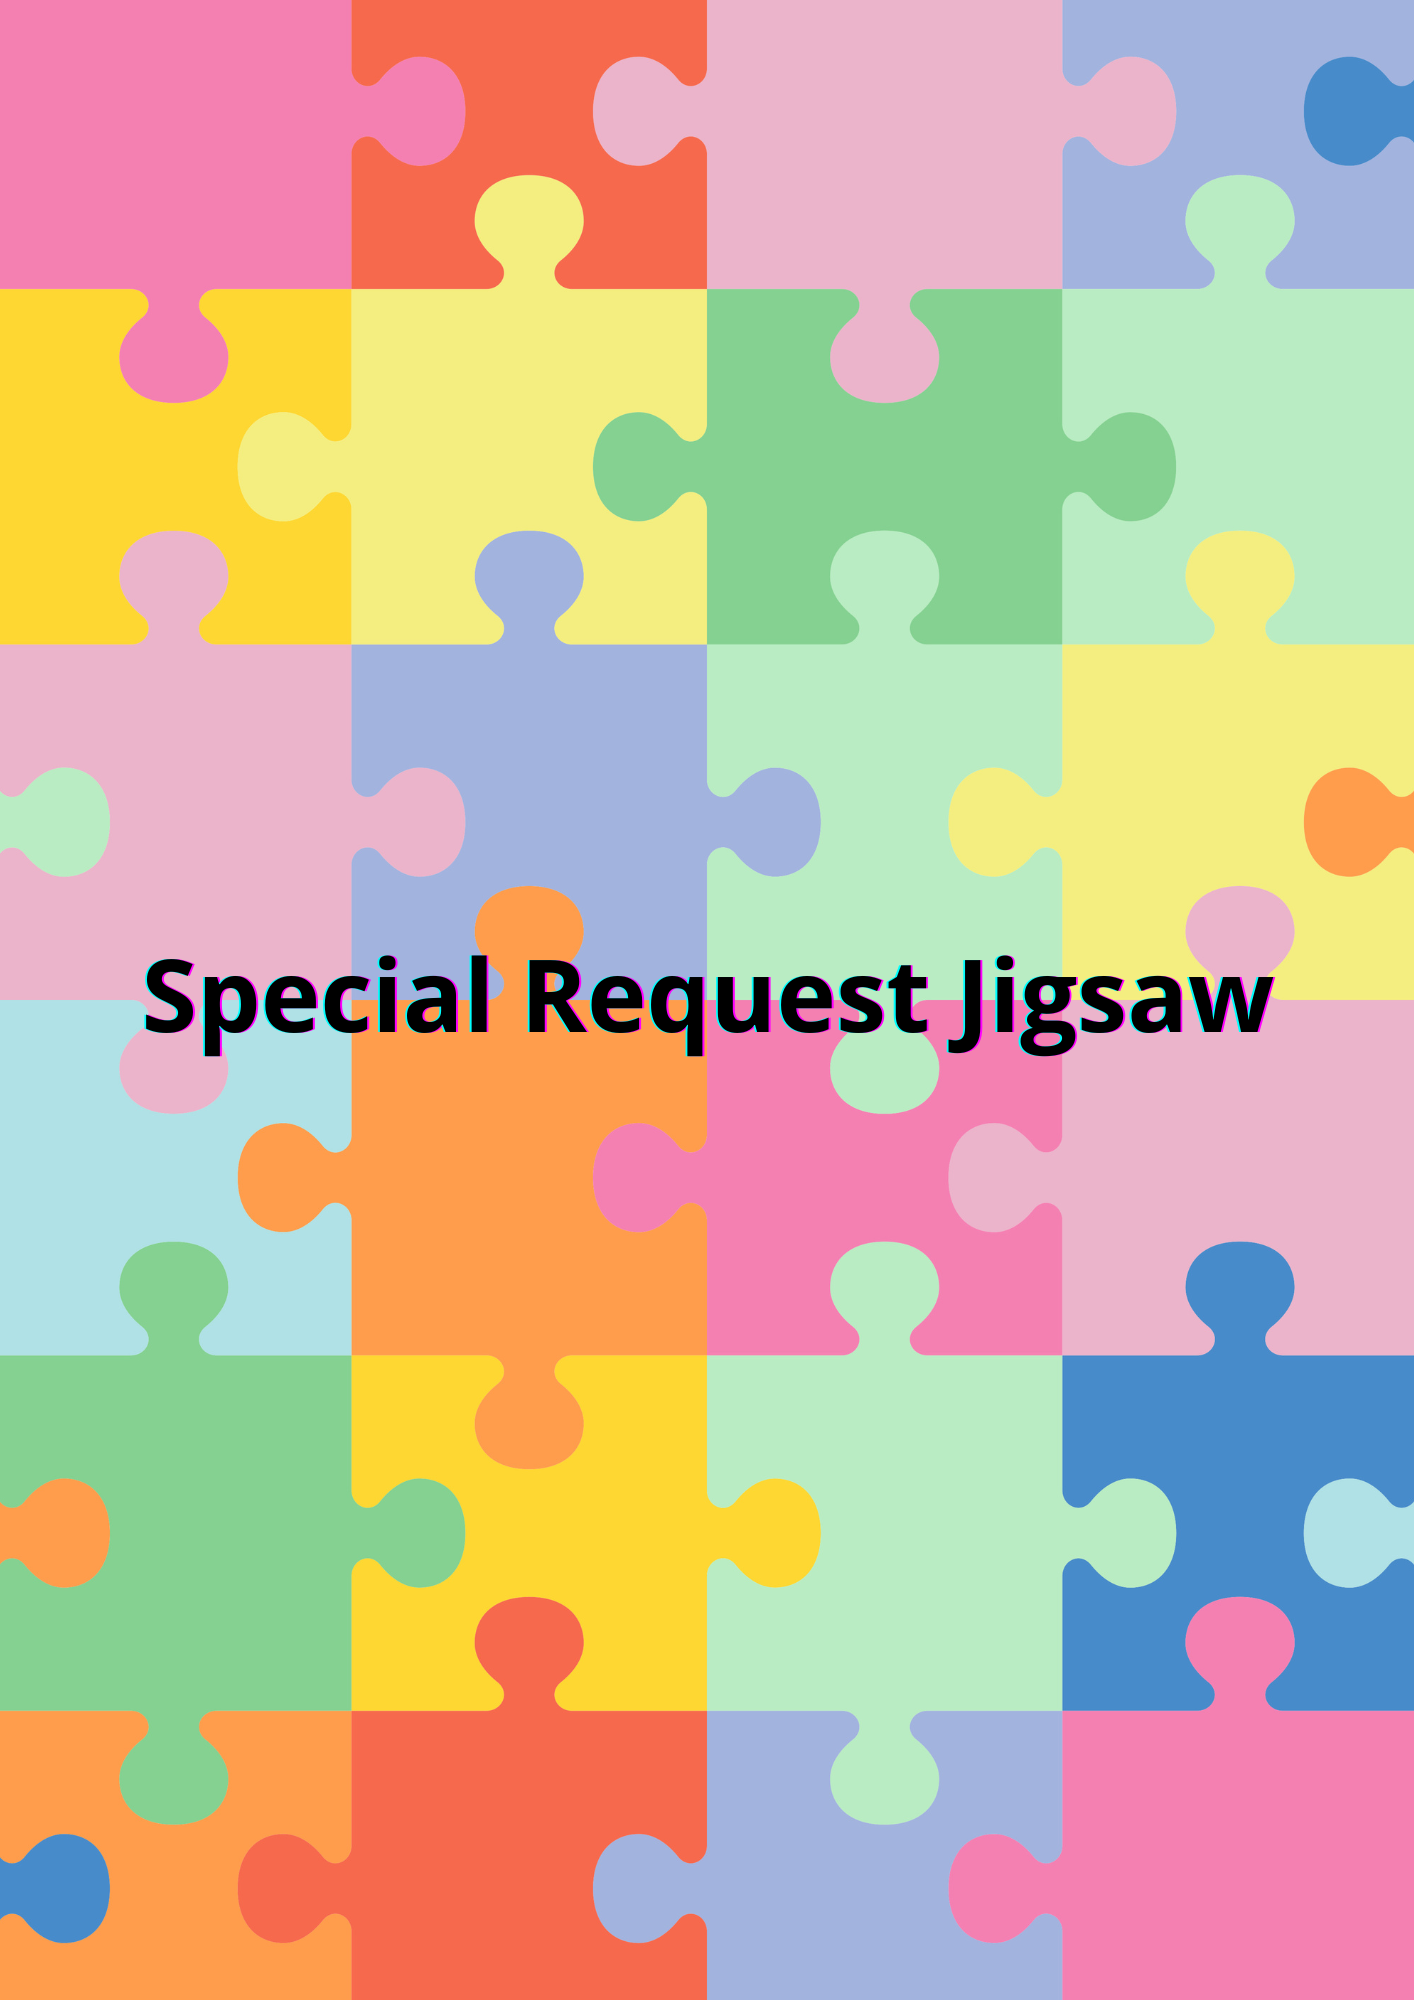 Special Request Jigsaw